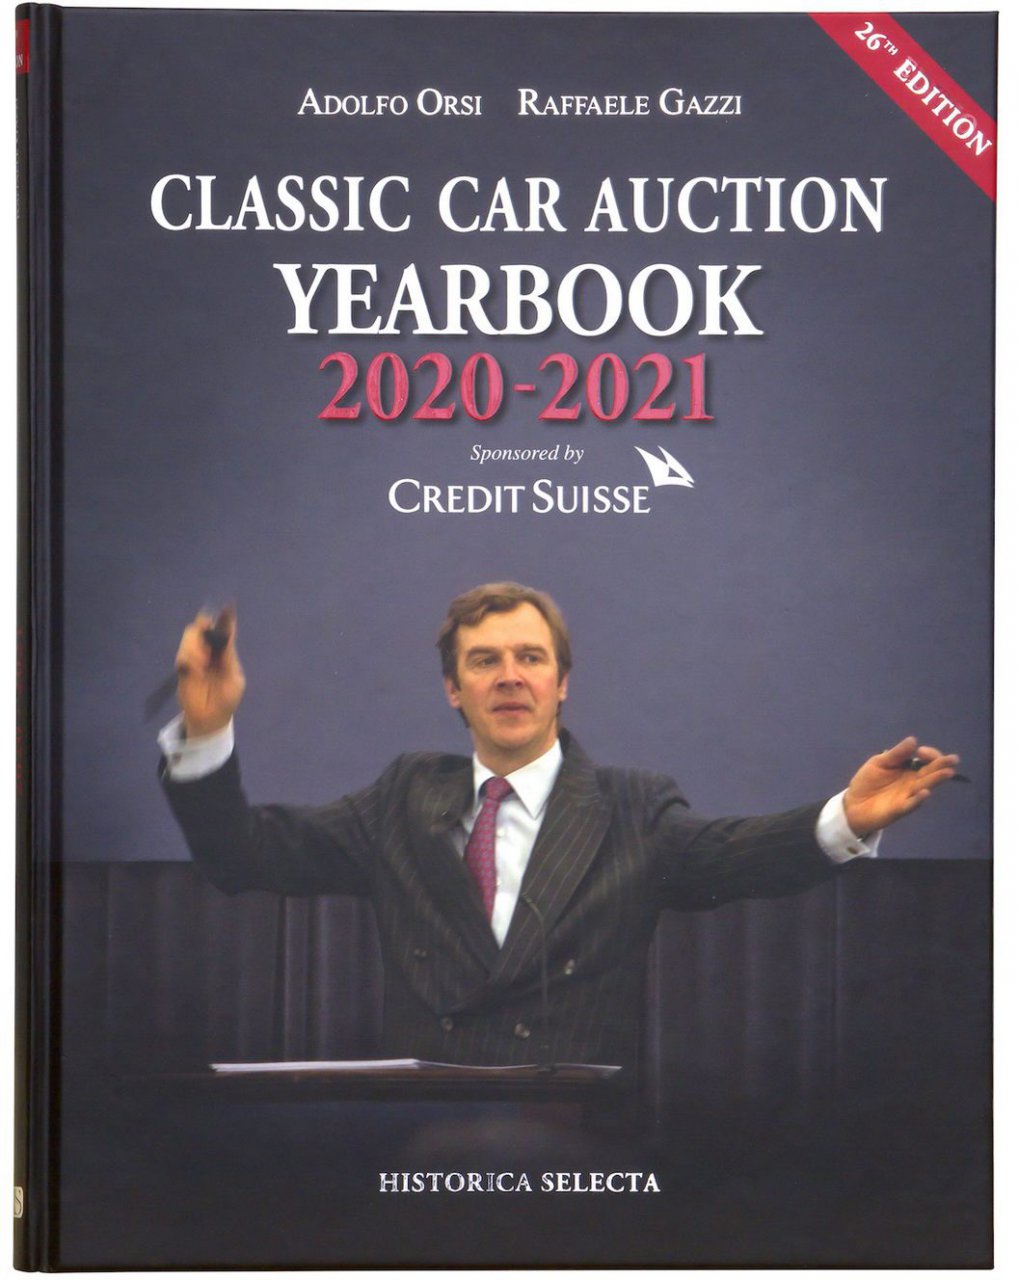 auction, Market analysis: Yearbook shares auction stats, and the analysis, ClassicCars.com Journal